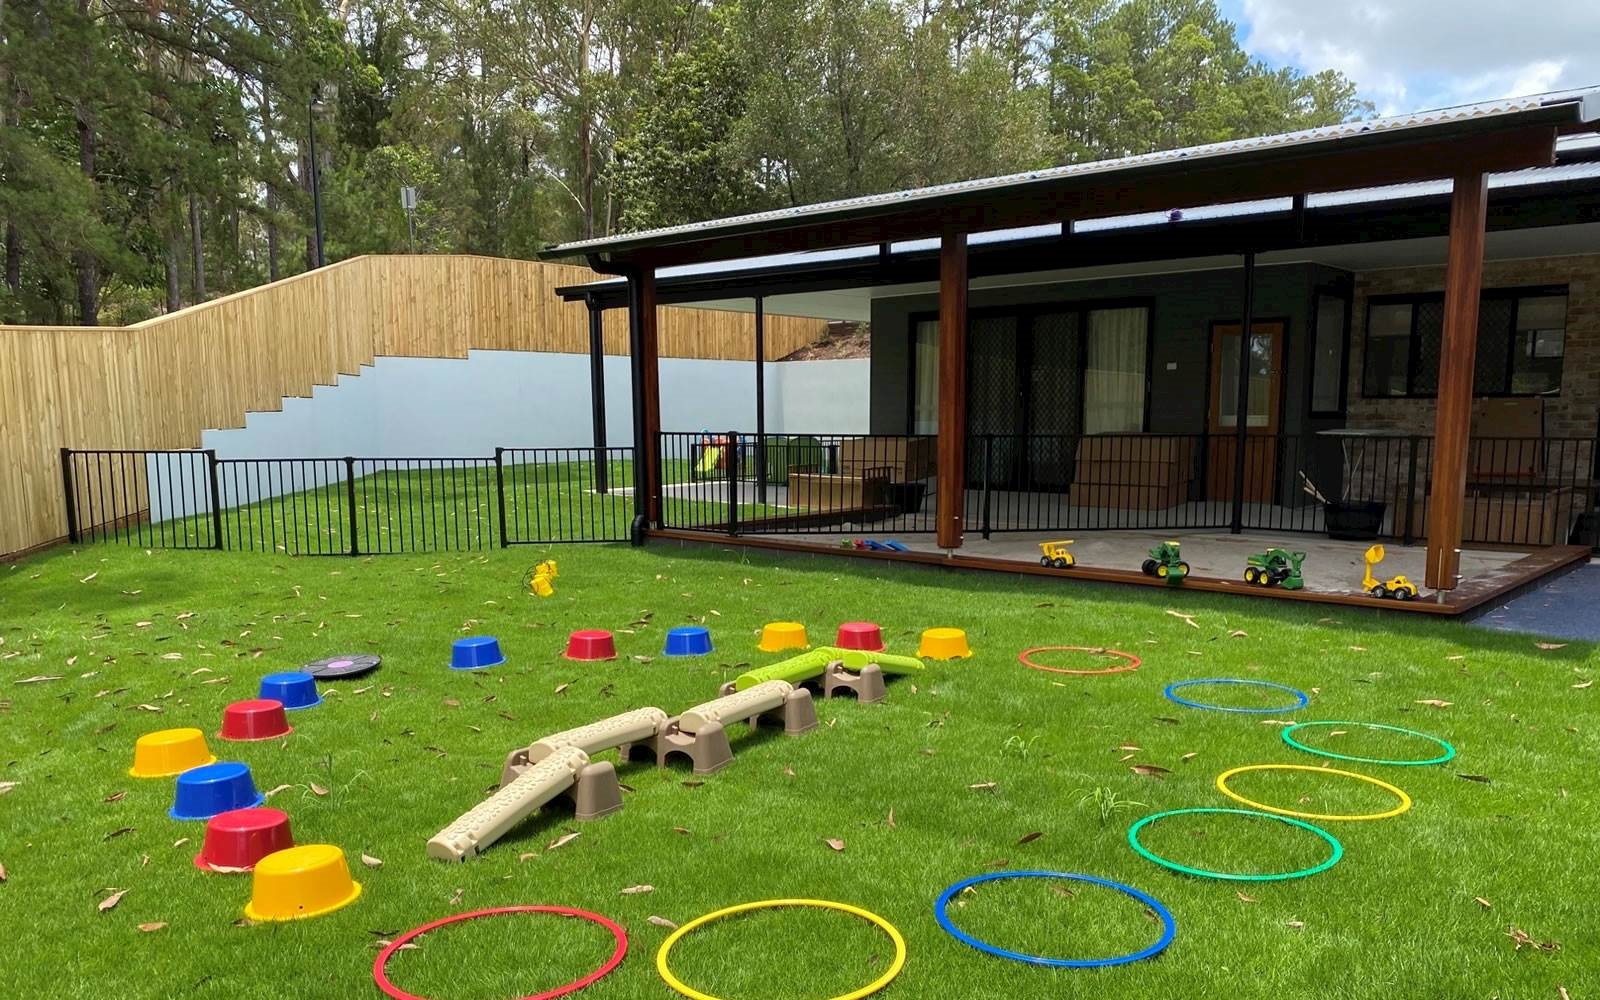 Palmwoods Early Learning Centre